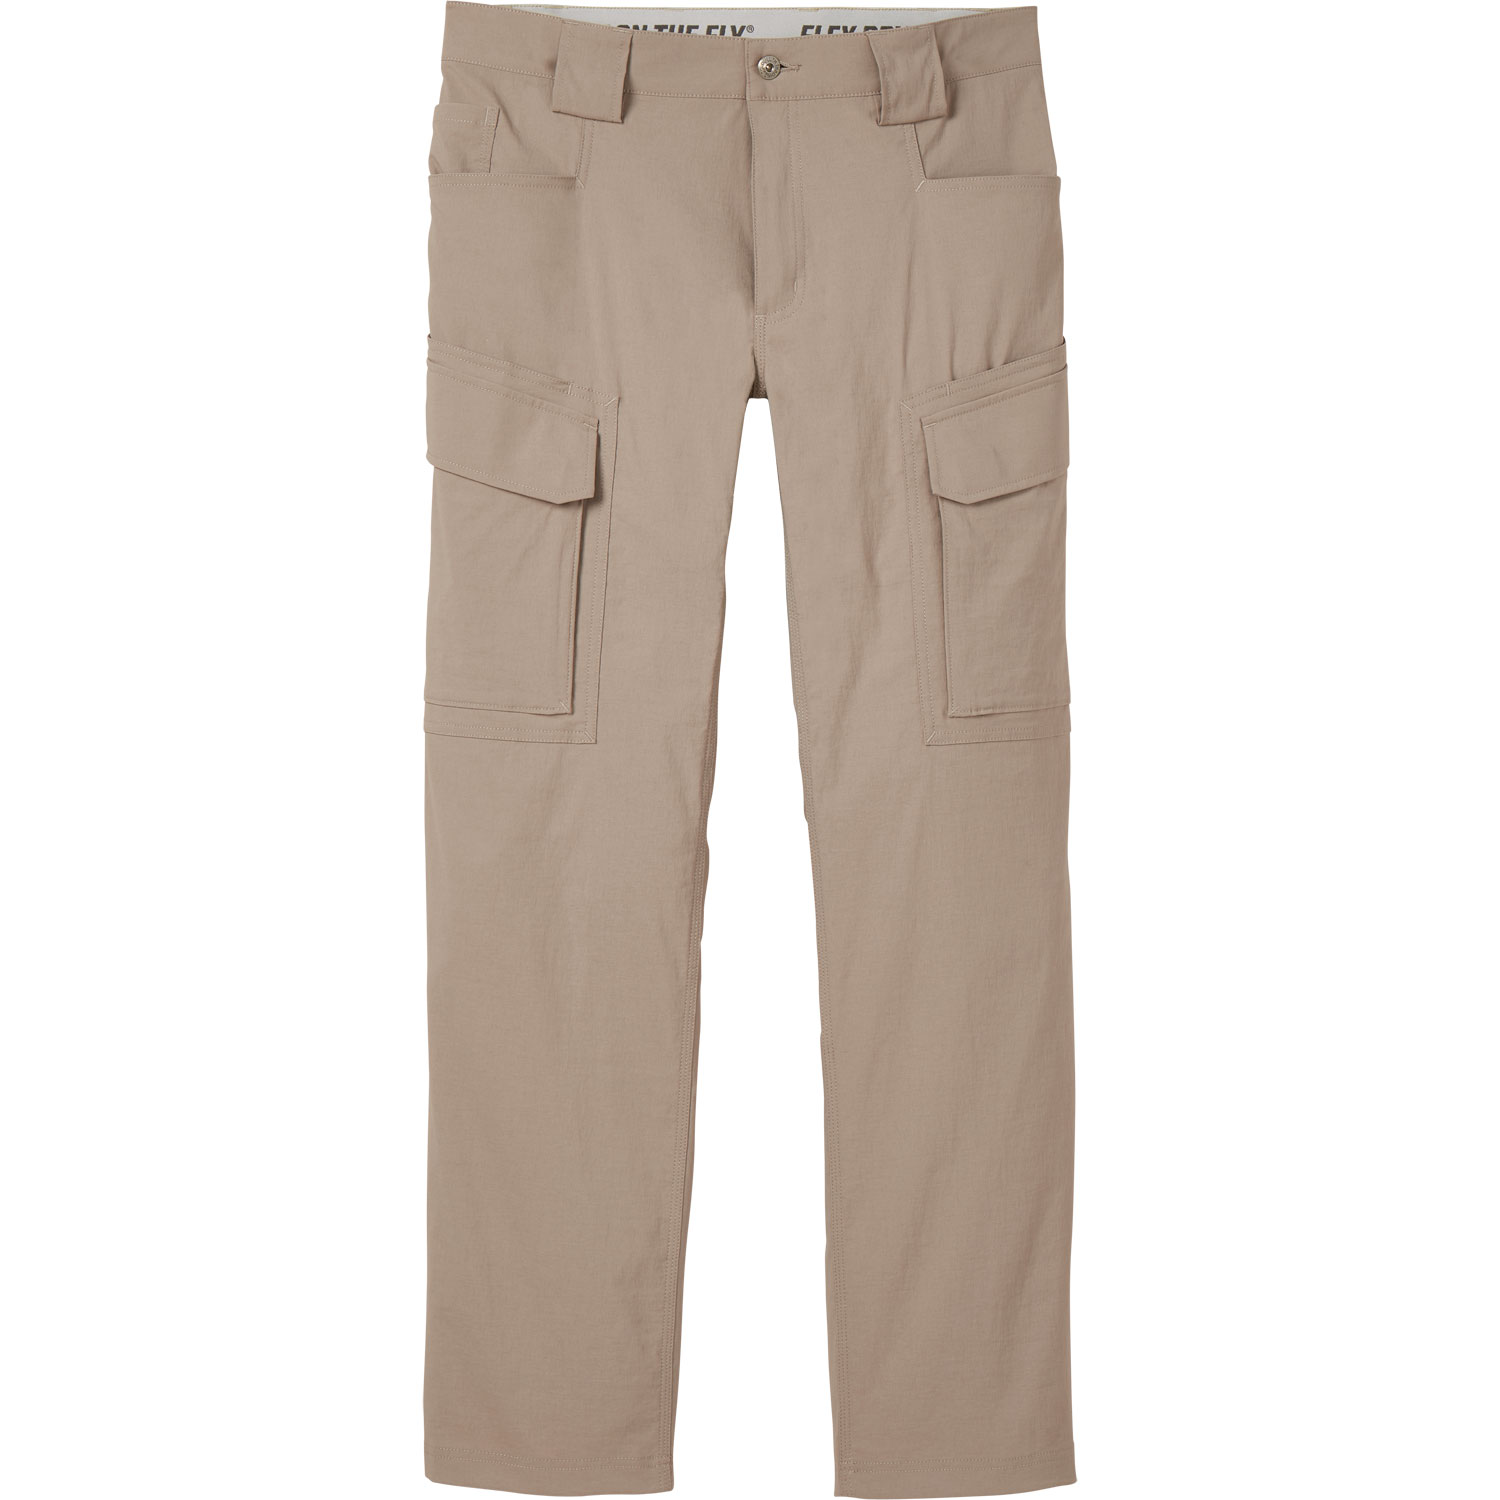 Men's DuluthFlex Dry on the Fly Standard Fit Cargo Pants | Duluth ...